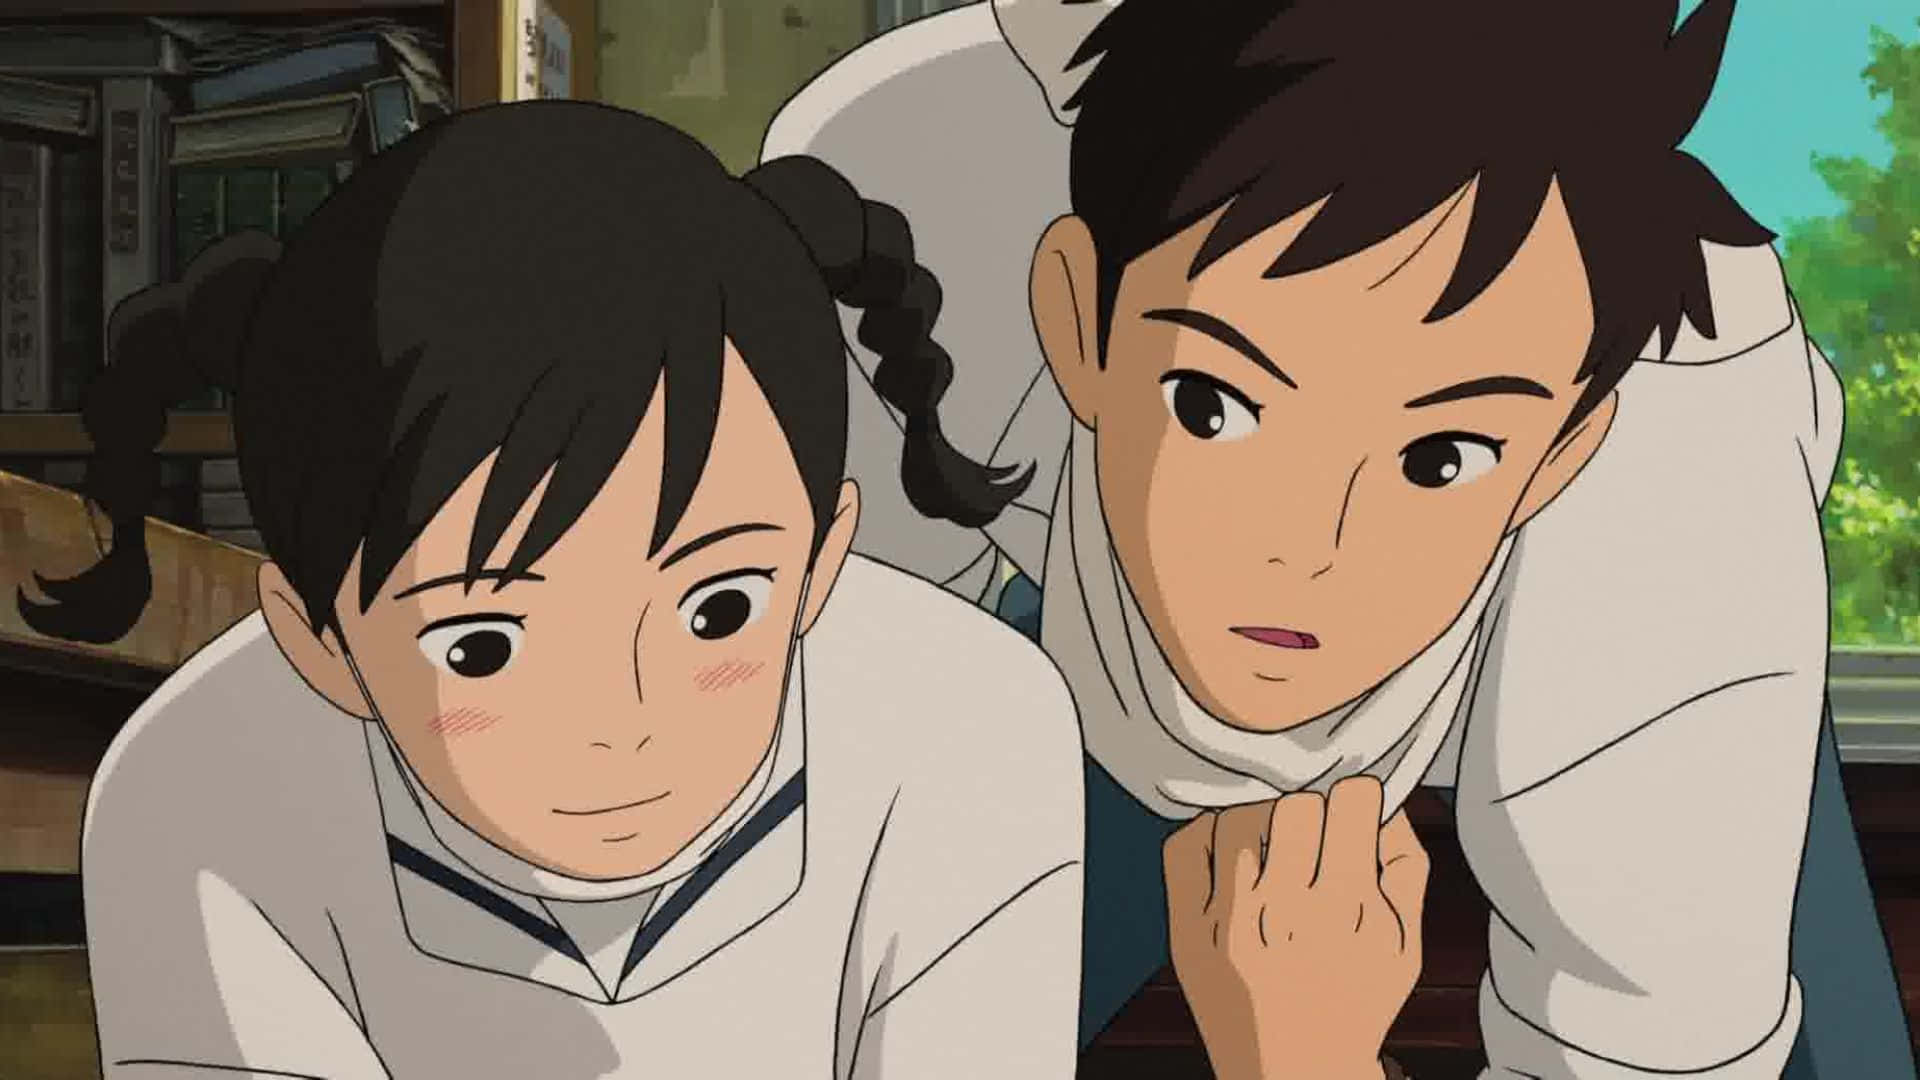 Umi and Shun together on Poppy Hill